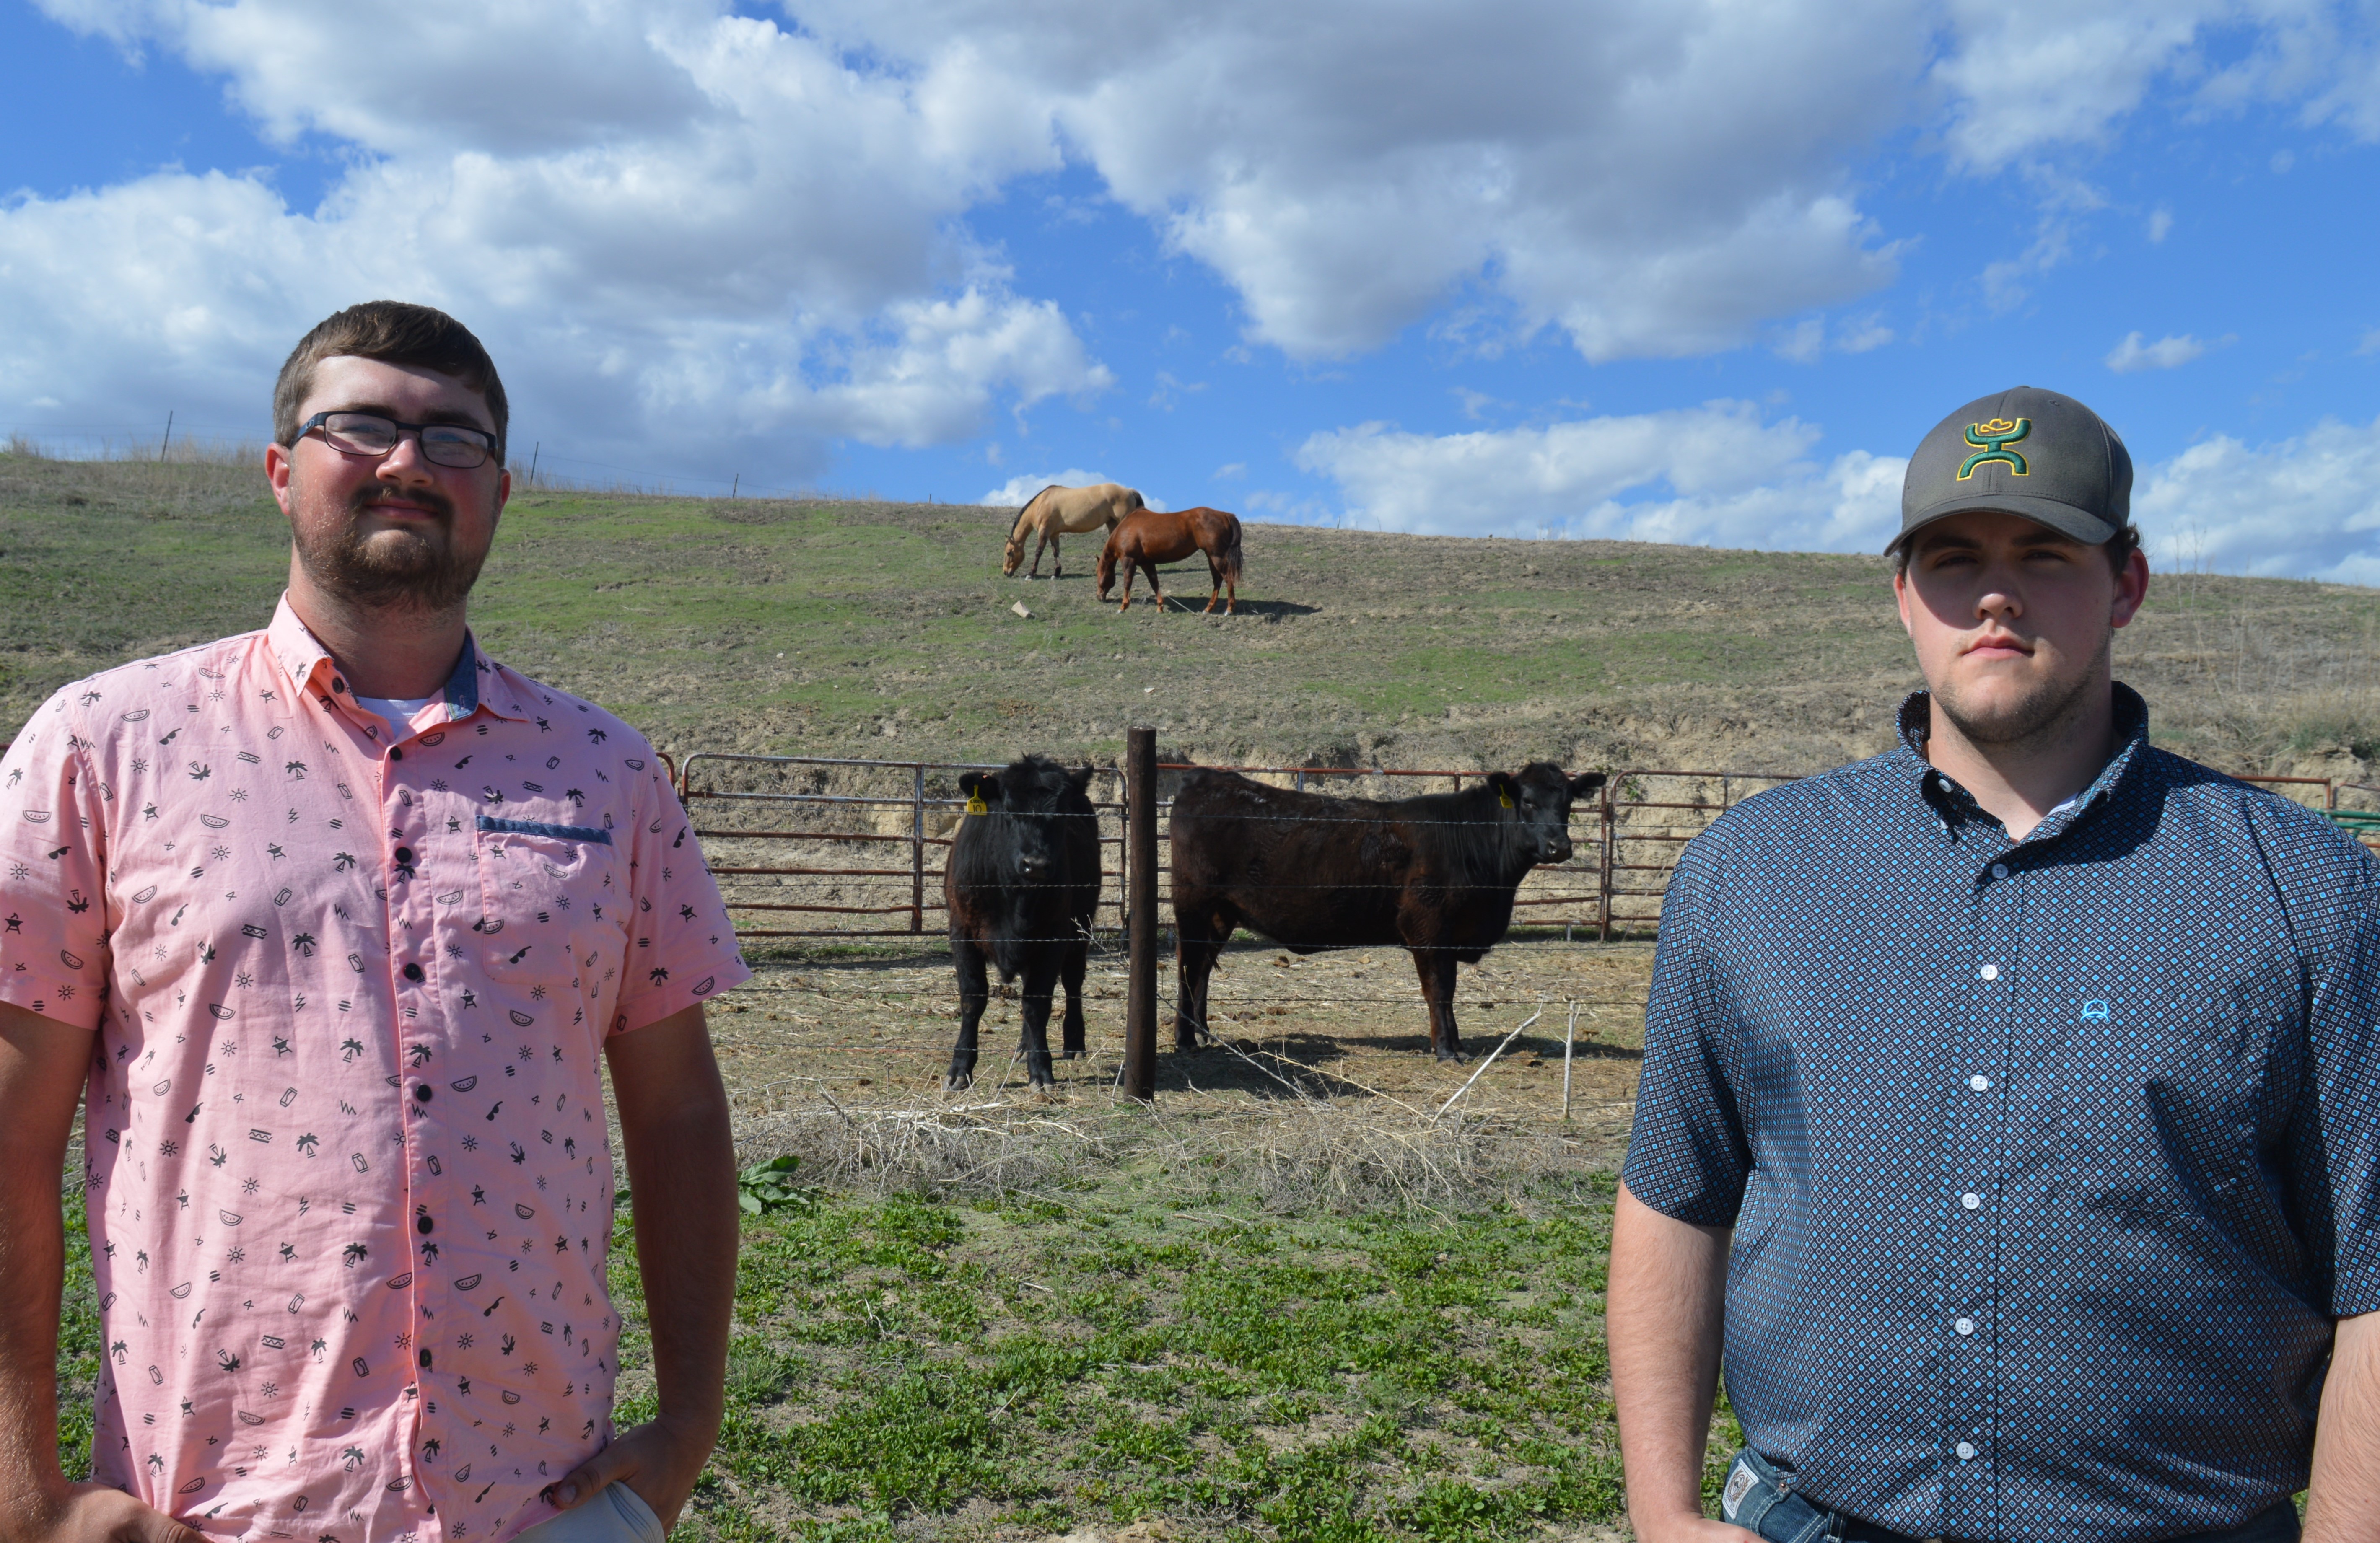 Hunter Lee of Chapman, at left, and Bailey Fleischman of Tekamah are recent graduates who participated in the NCTA Heifer Link program. (Crawford/NCTA News)